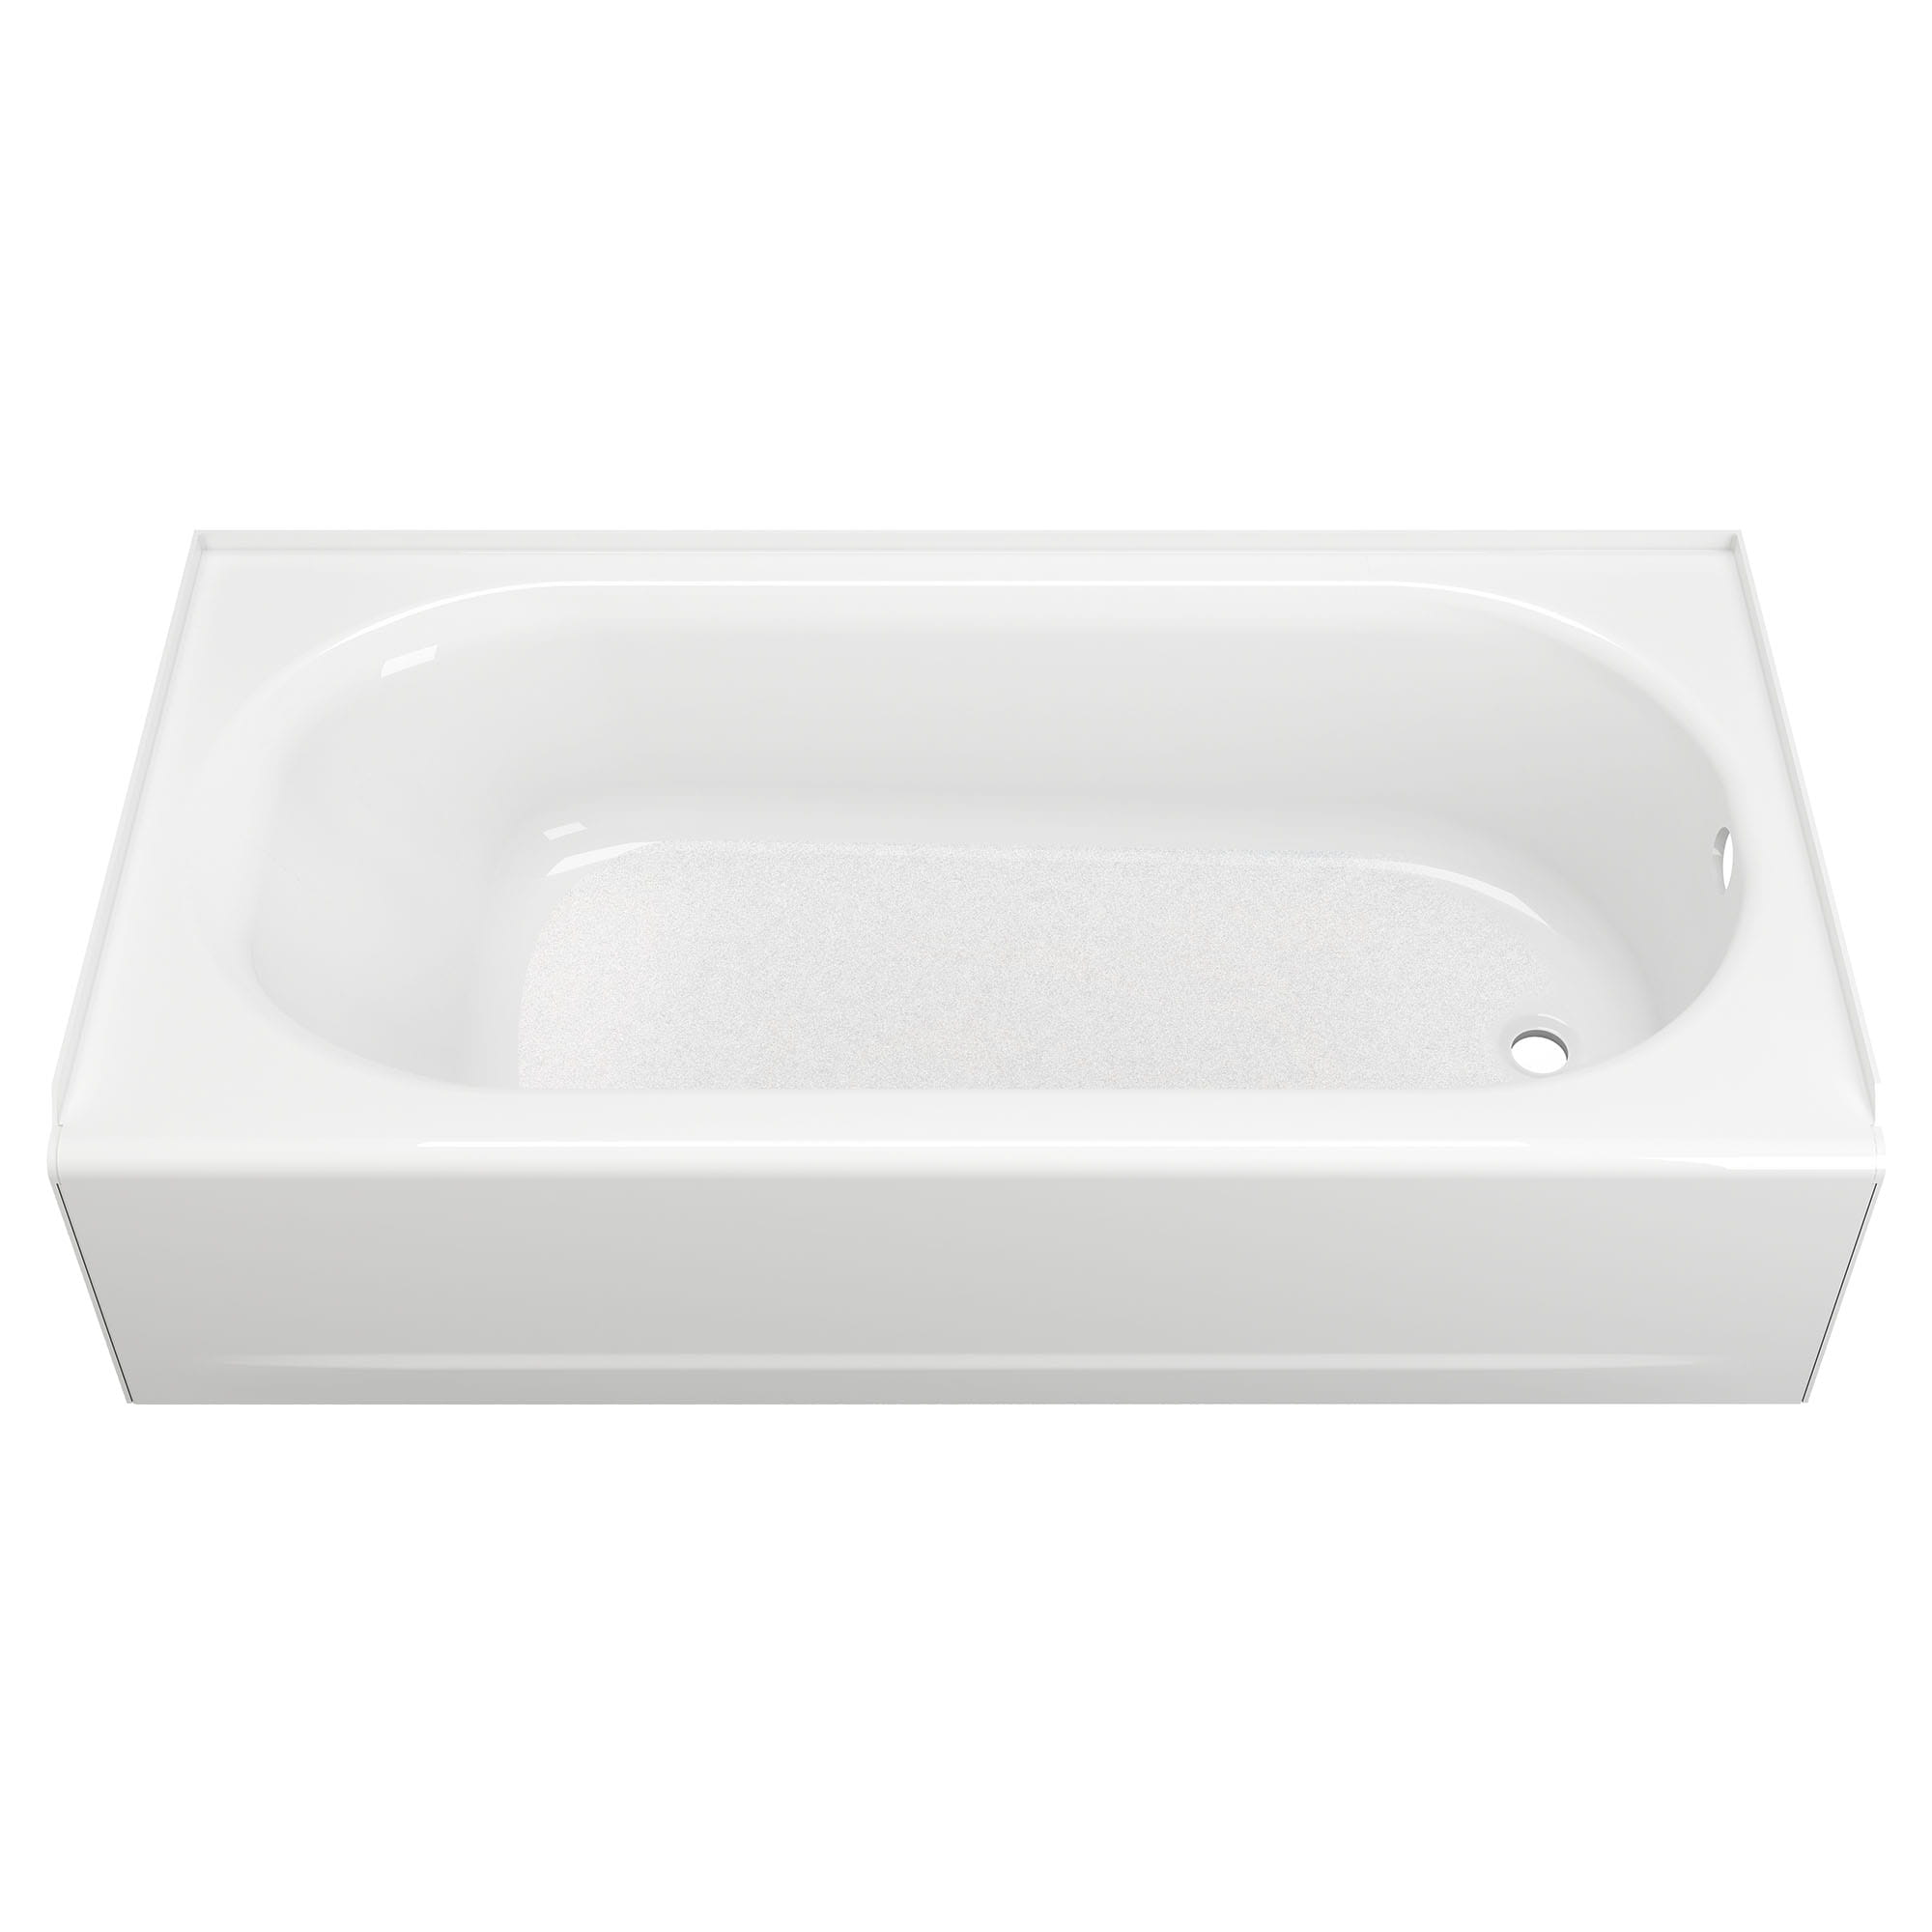 Princeton Americast 60 x 30 Inch Integral Apron Bathtub Above Floor Rough with Right Hand Outlet ARCTIC